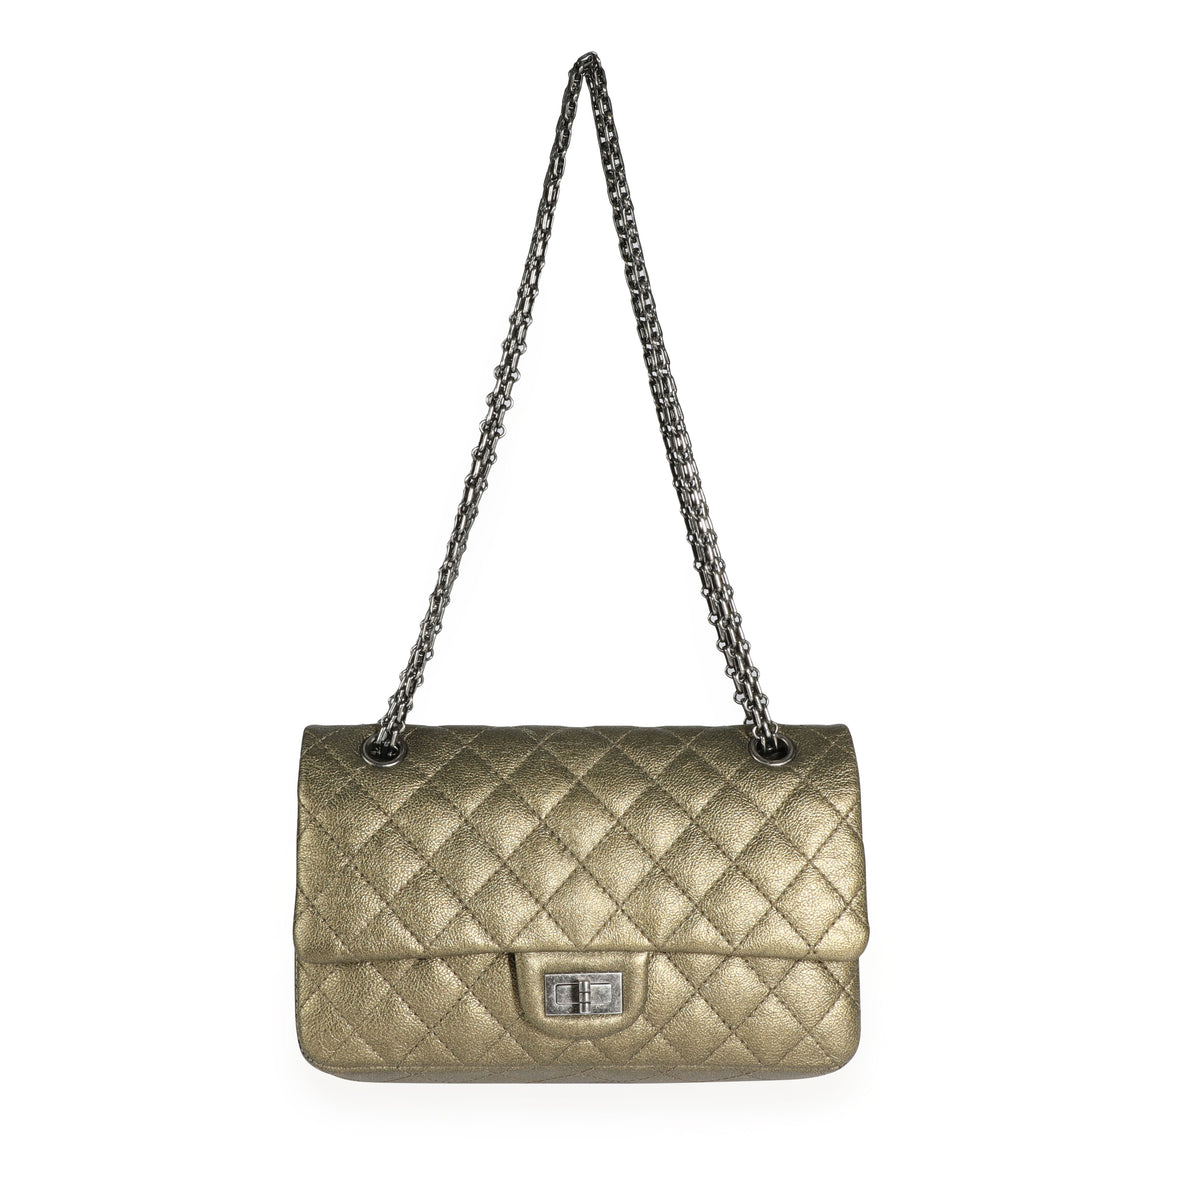 Chanel Gold Quilted Calfskin Reissue 2.55 225 Double Flap Bag, myGemma